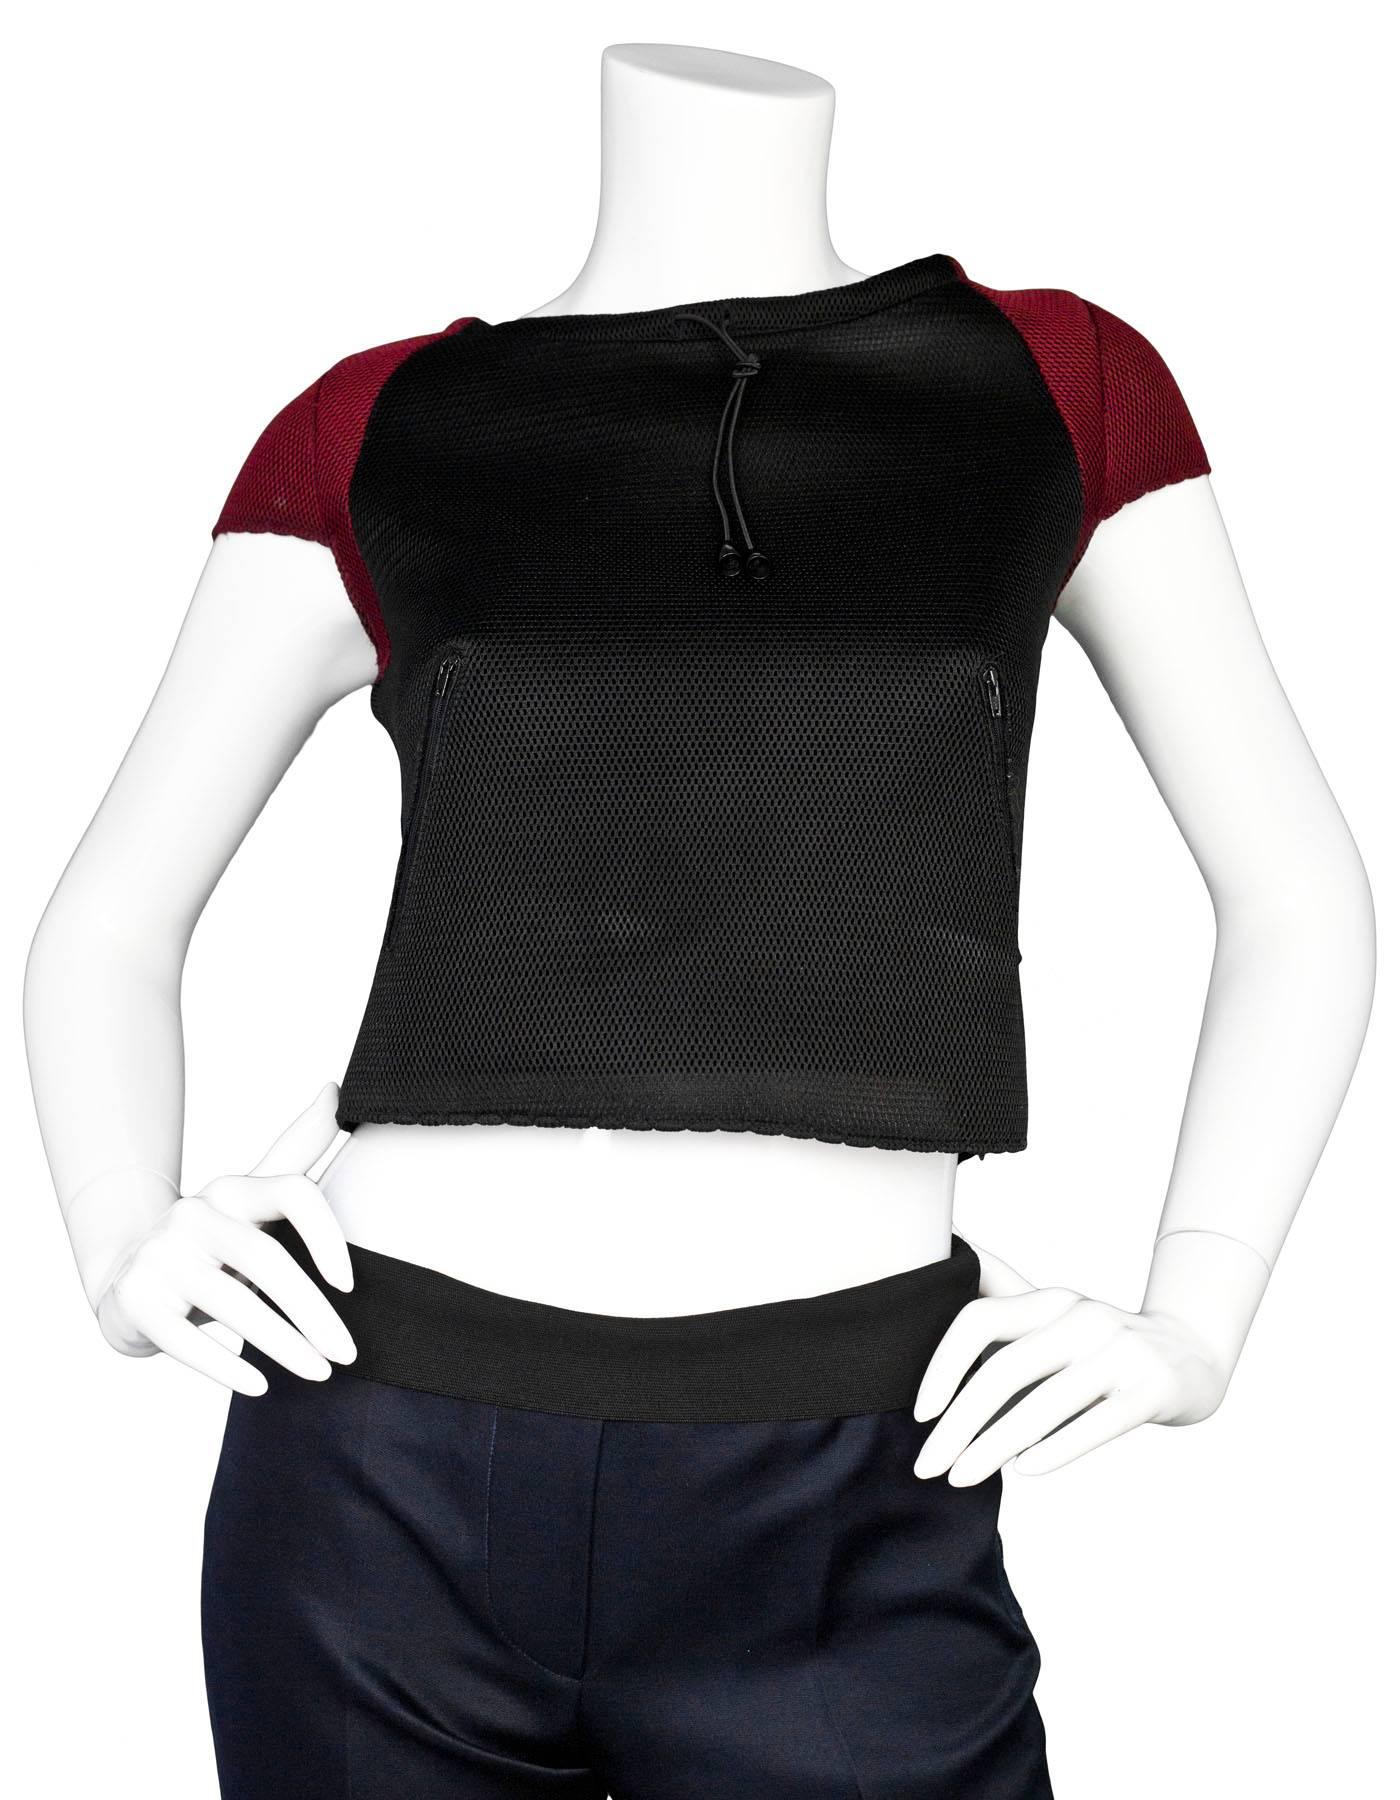 Miu Miu Black and Red Mesh Cop Top Sz IT40

Made In: Italy
Color: Black, red
Composition: 100% Polyester
Closure/Opening: Side zip closure
Overall Condition: Excellent pre-owned condition, minor soiling at front and hem

Marked Size: IT 40 / US2,